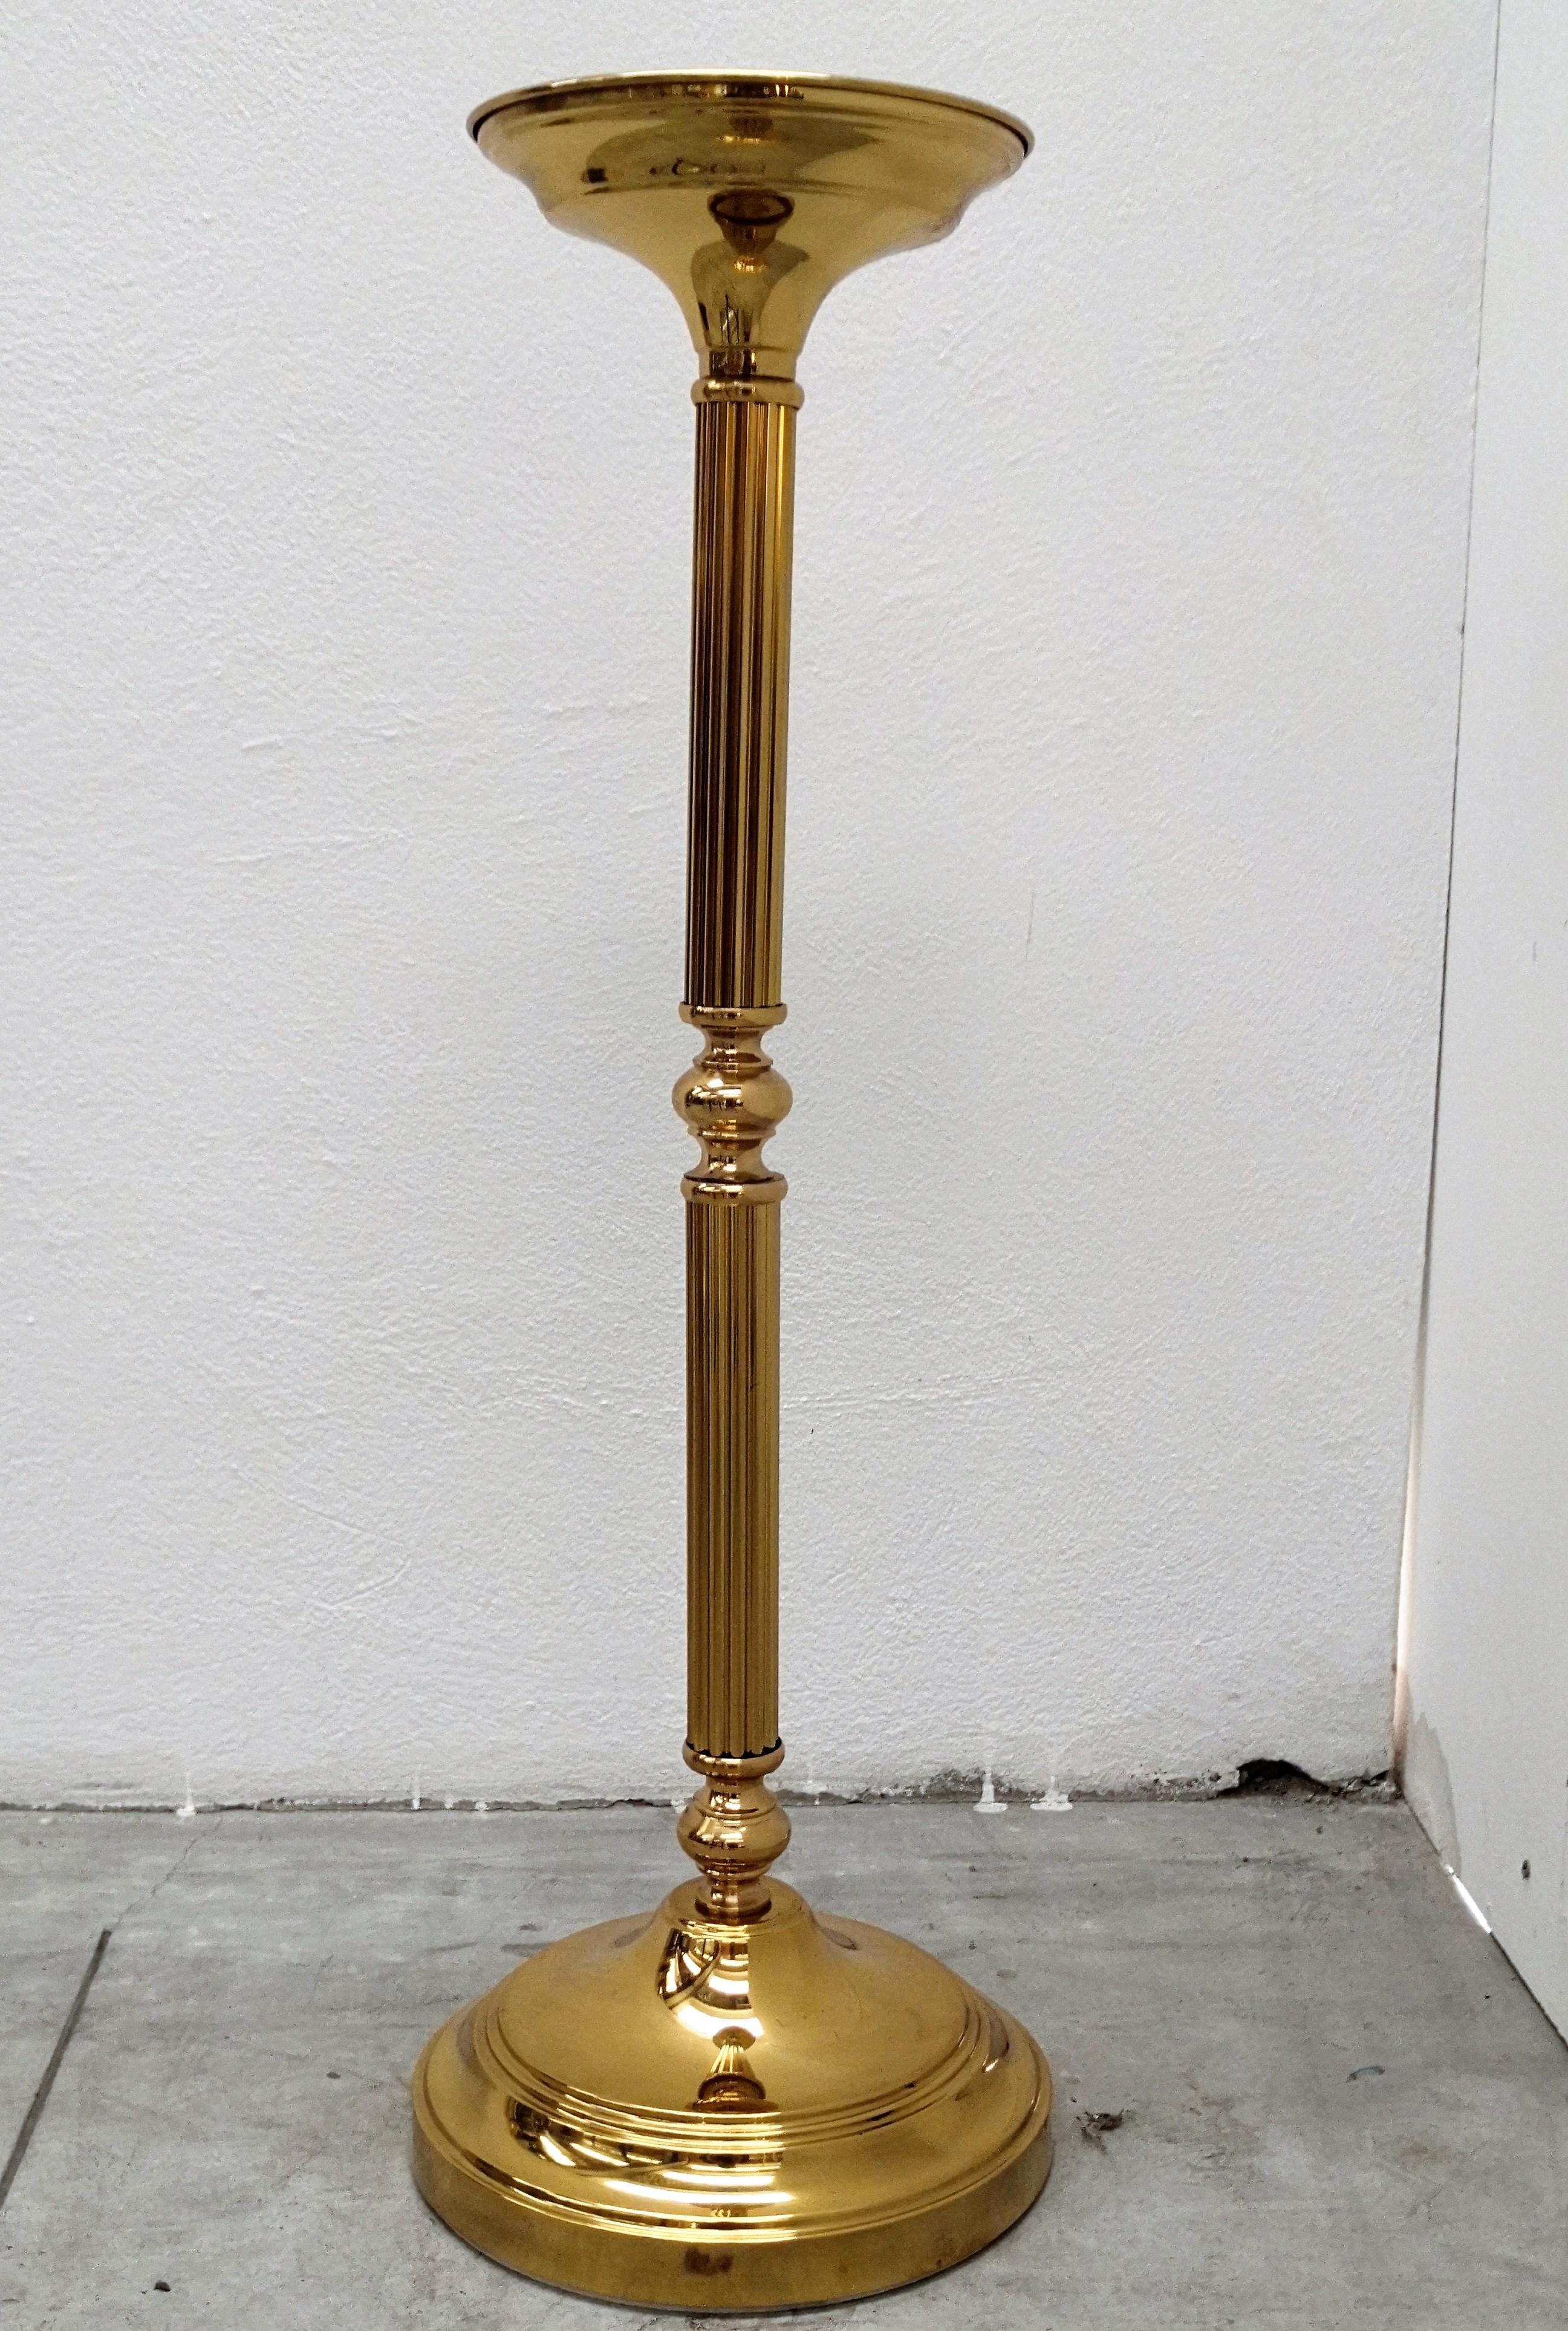 Beautiful and stylish vintage 1980s Italian brass pedestal table or flower pot, champagne wine cooler Stand. Very good condition with great brass metal part. 2 pieces available.

A great piece that perfectly adds to every home decor the typical